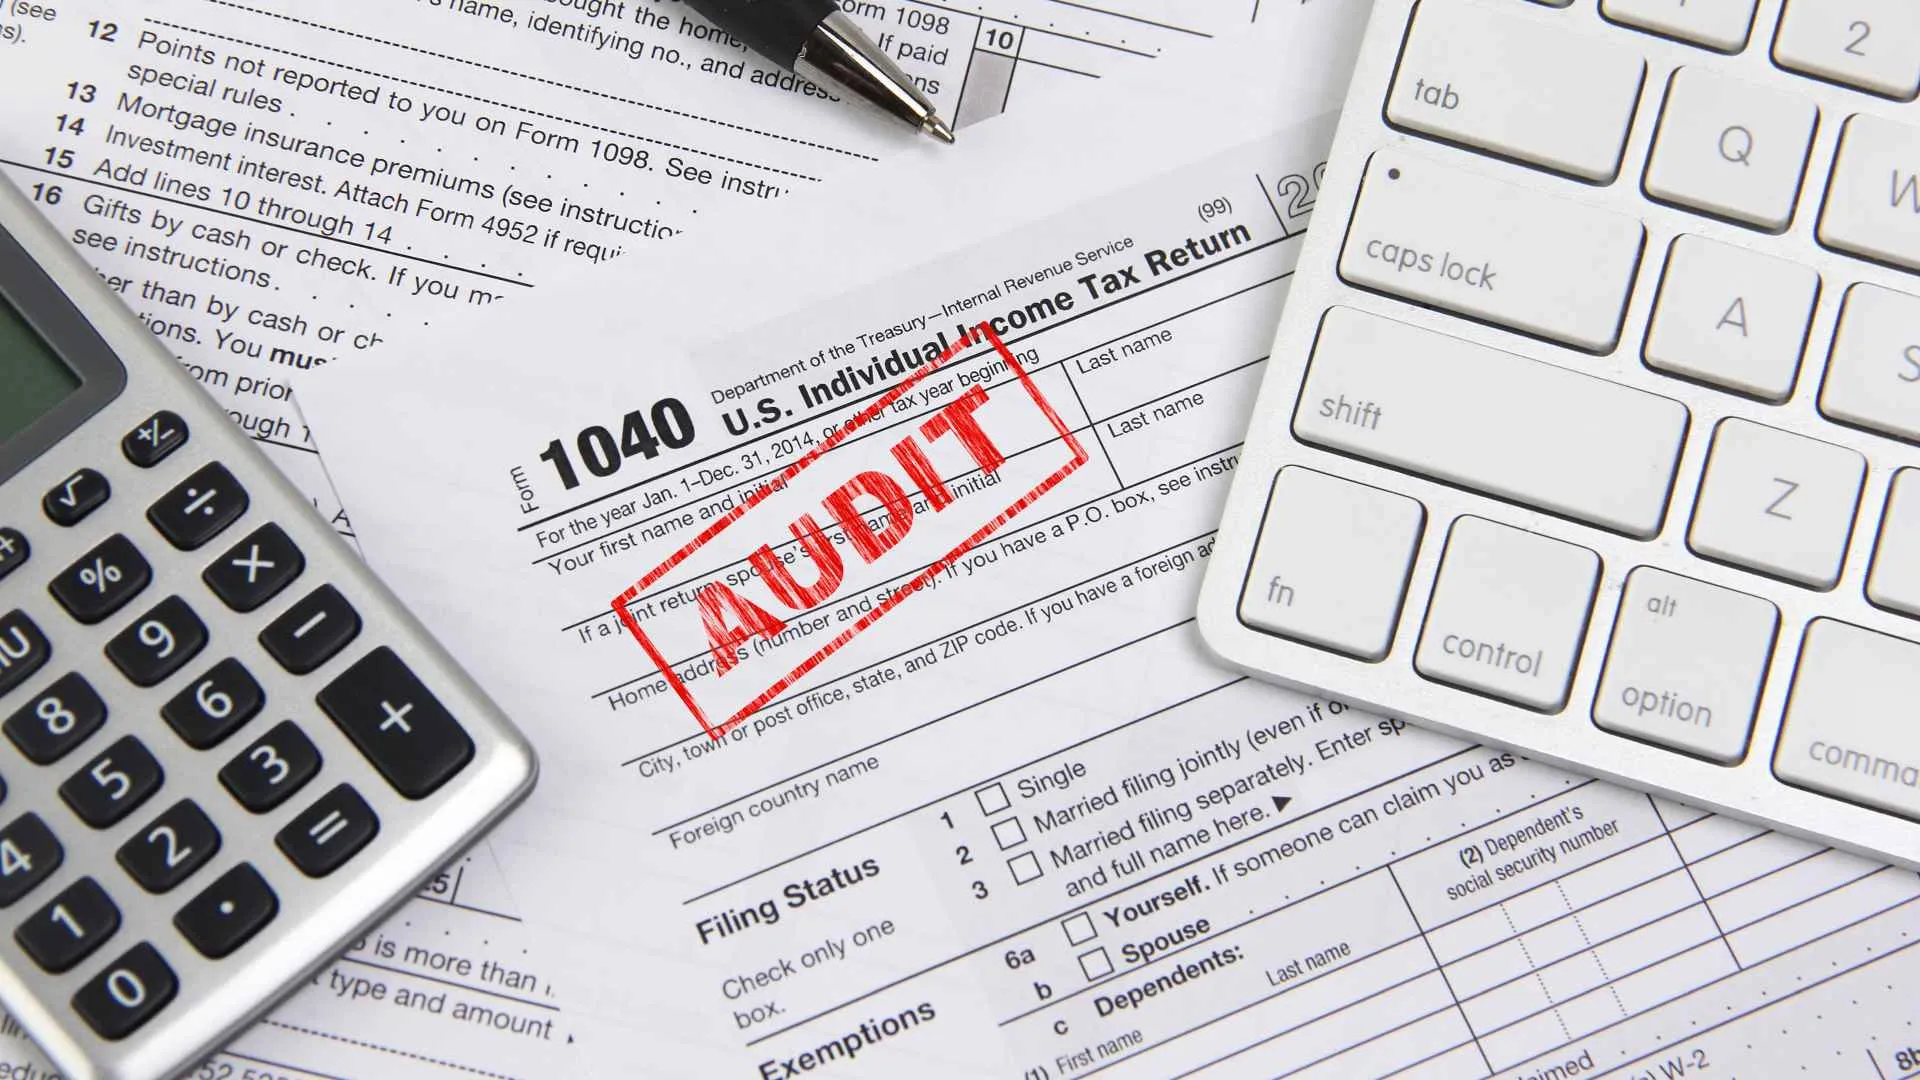 Concept image for filing federal income taxes online and being audited.